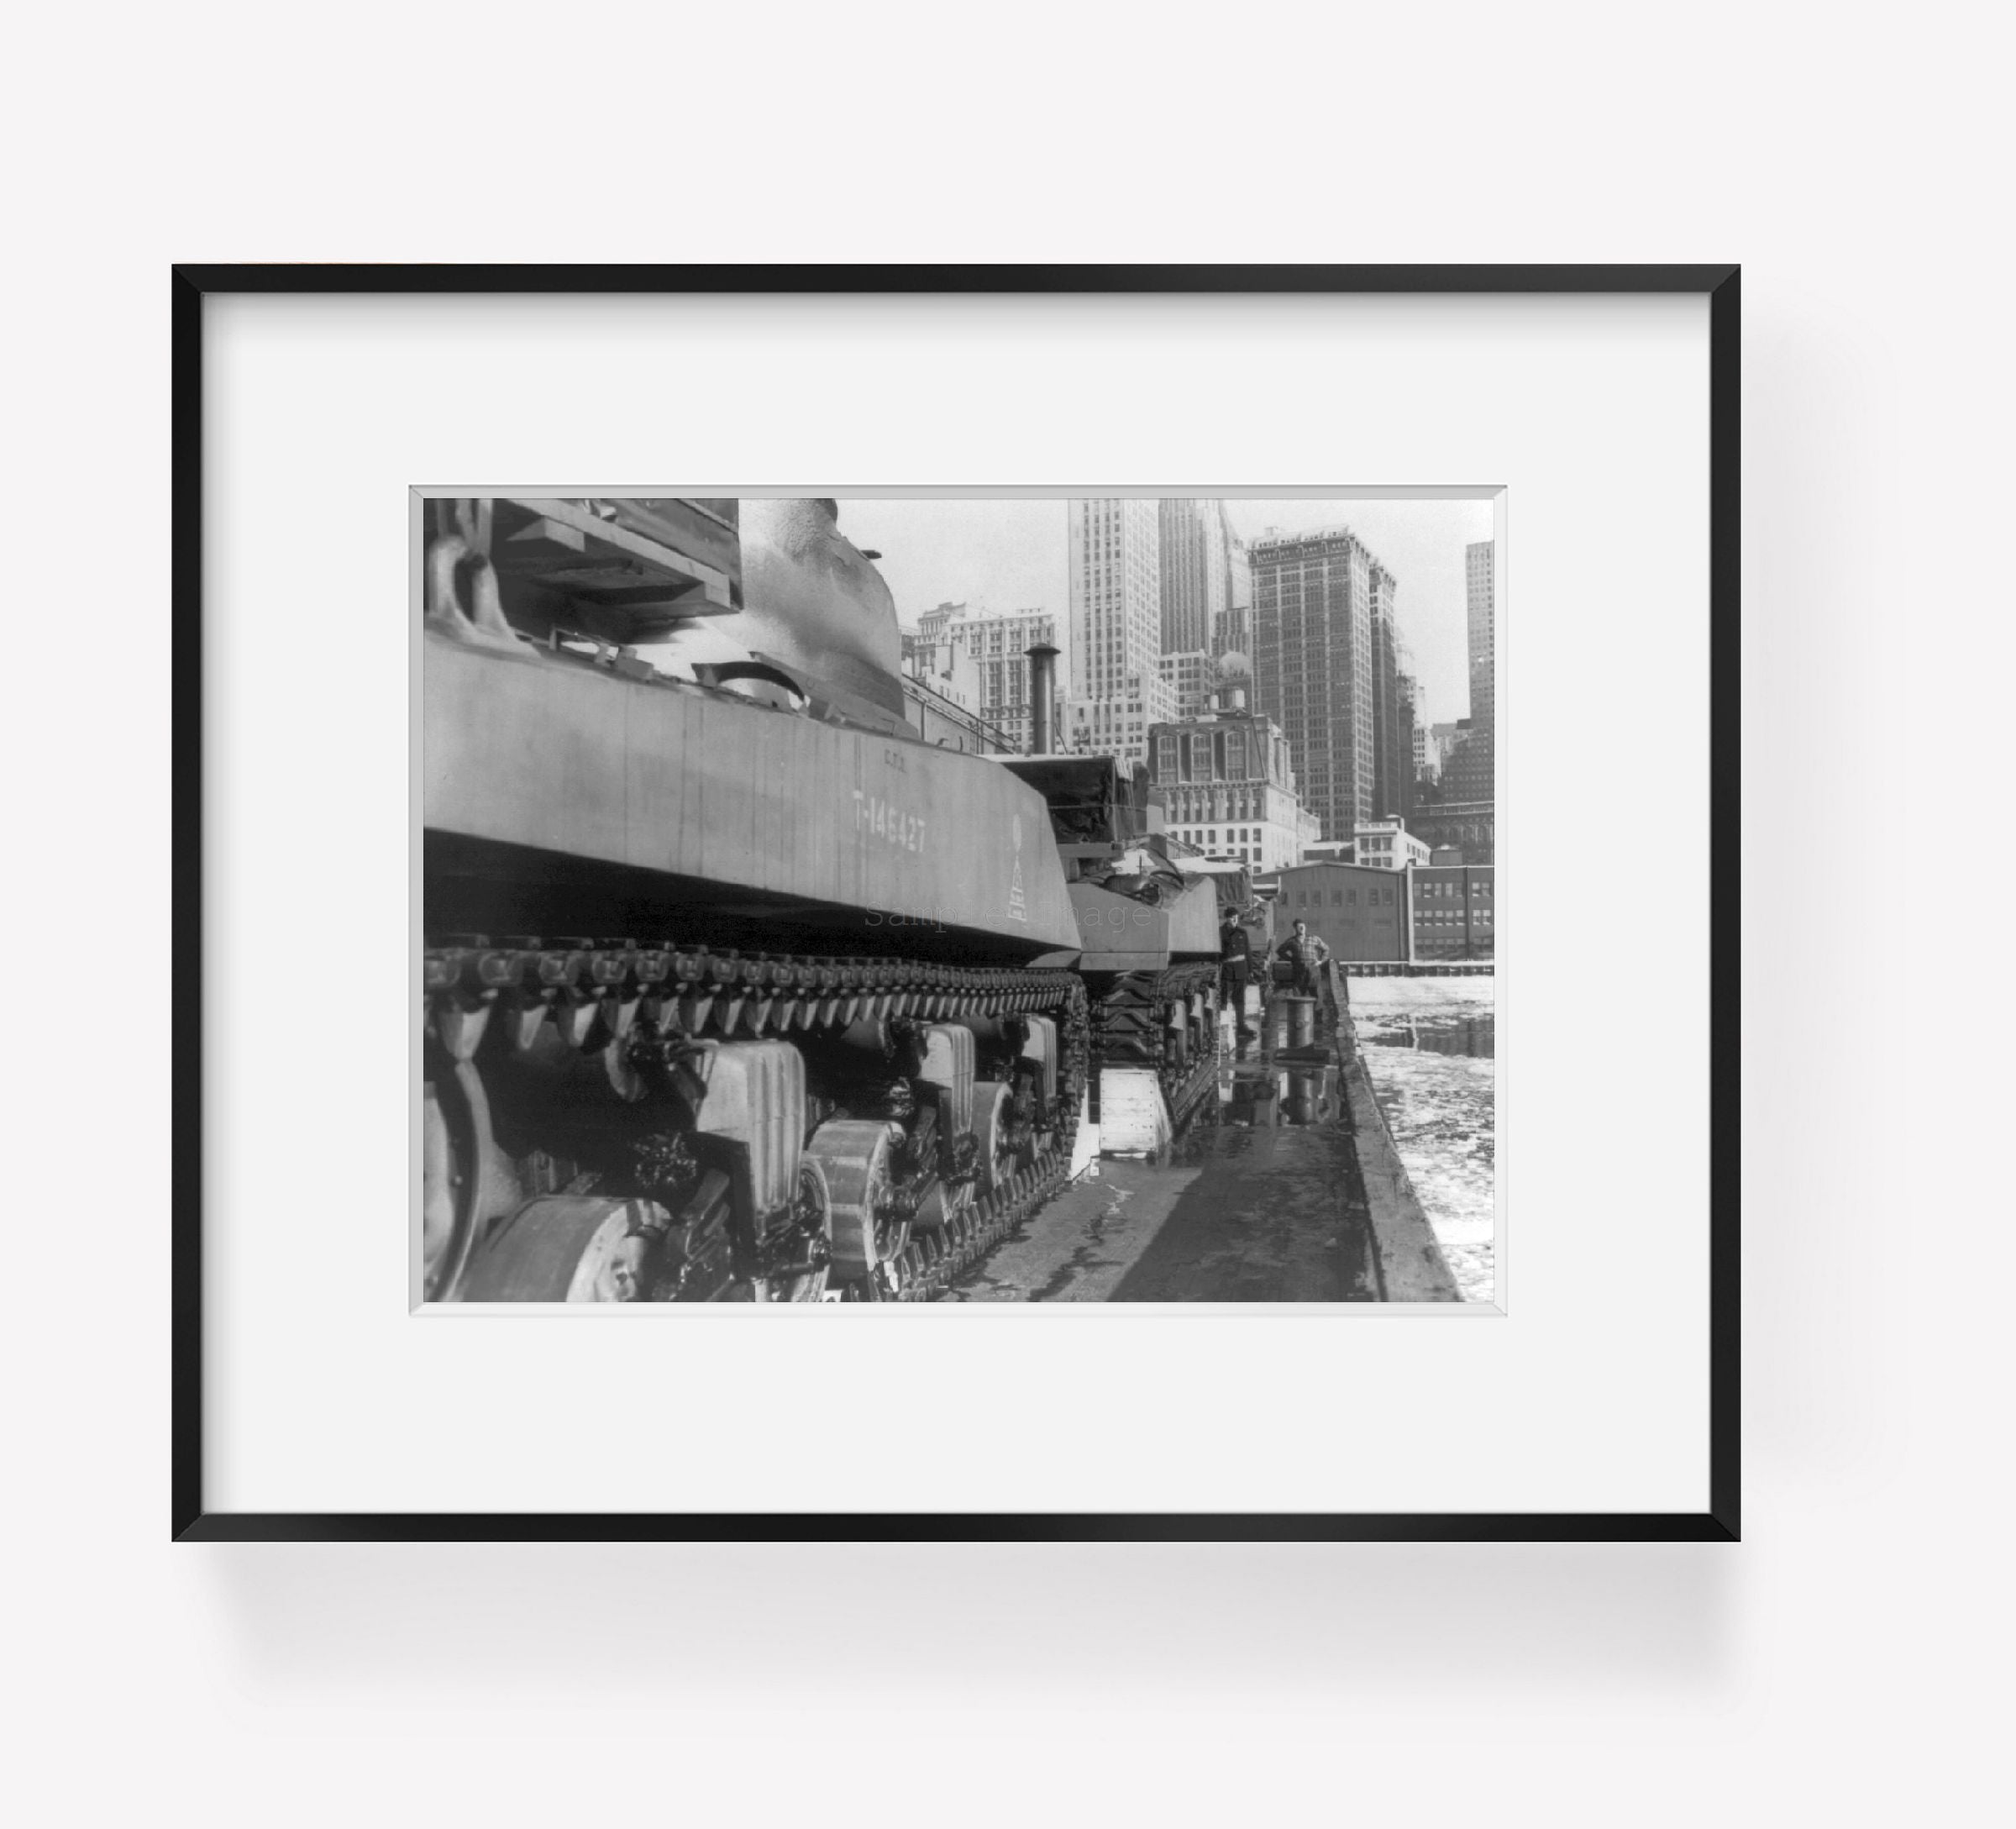 Photo: Army tanks on barge in icy water, New York Harbor, skyscrapers, NY, Febuary 1